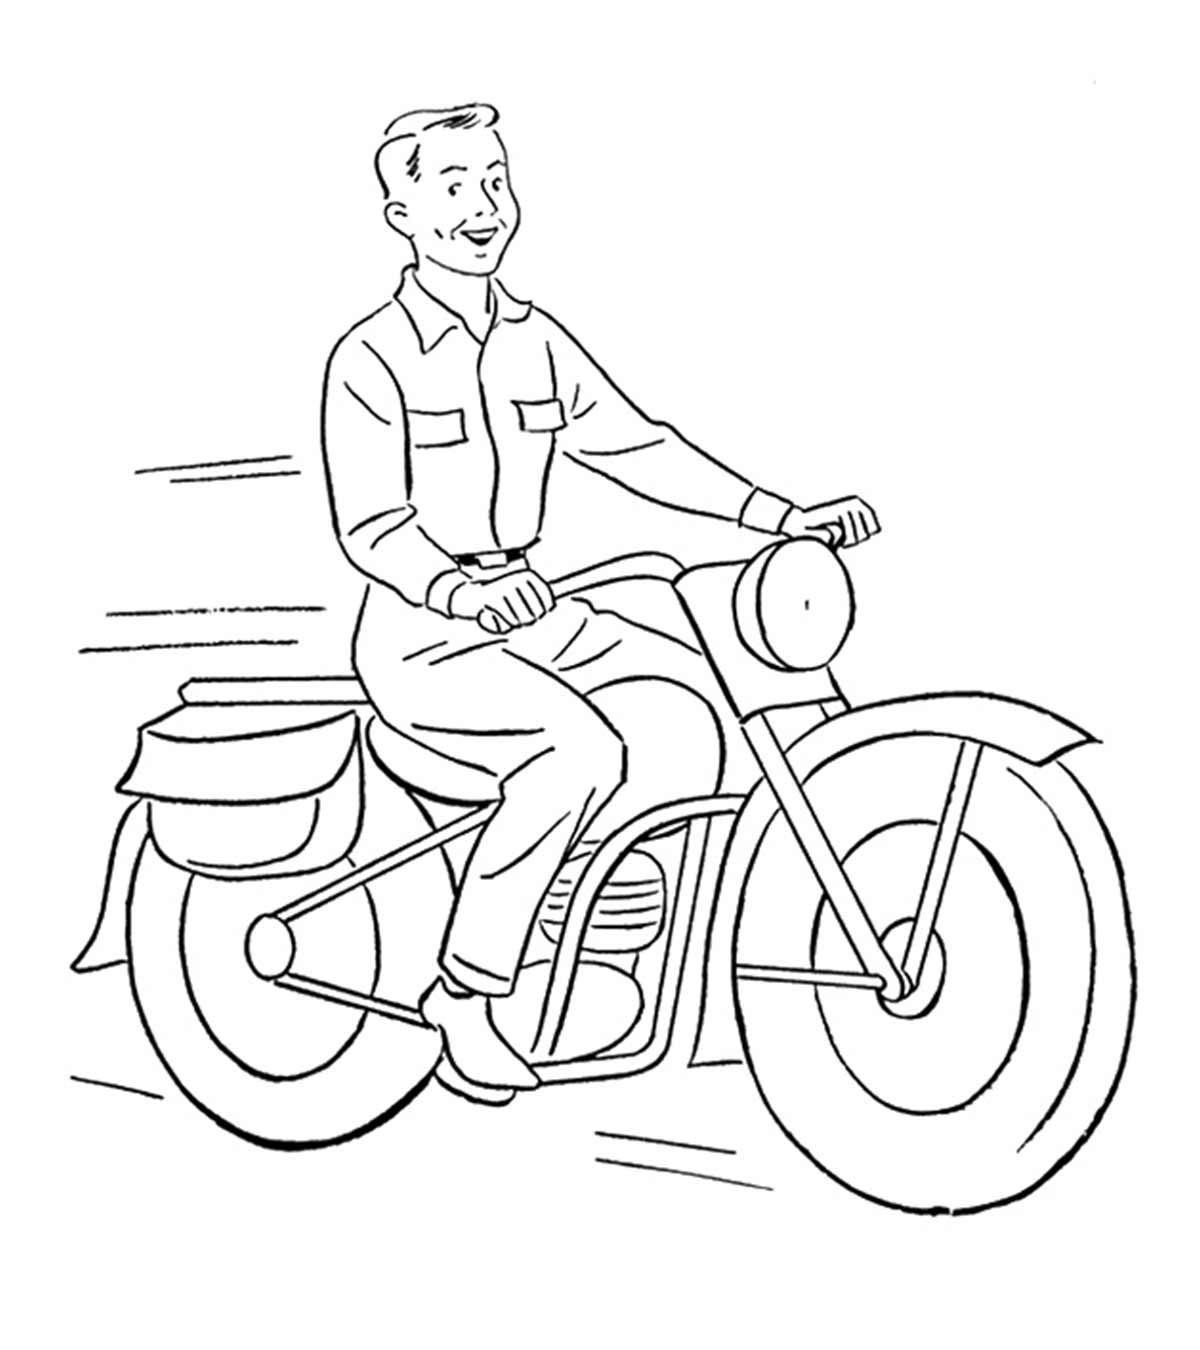 10 Best Motorcycle Coloring Pages Your Toddler Will Love To Color